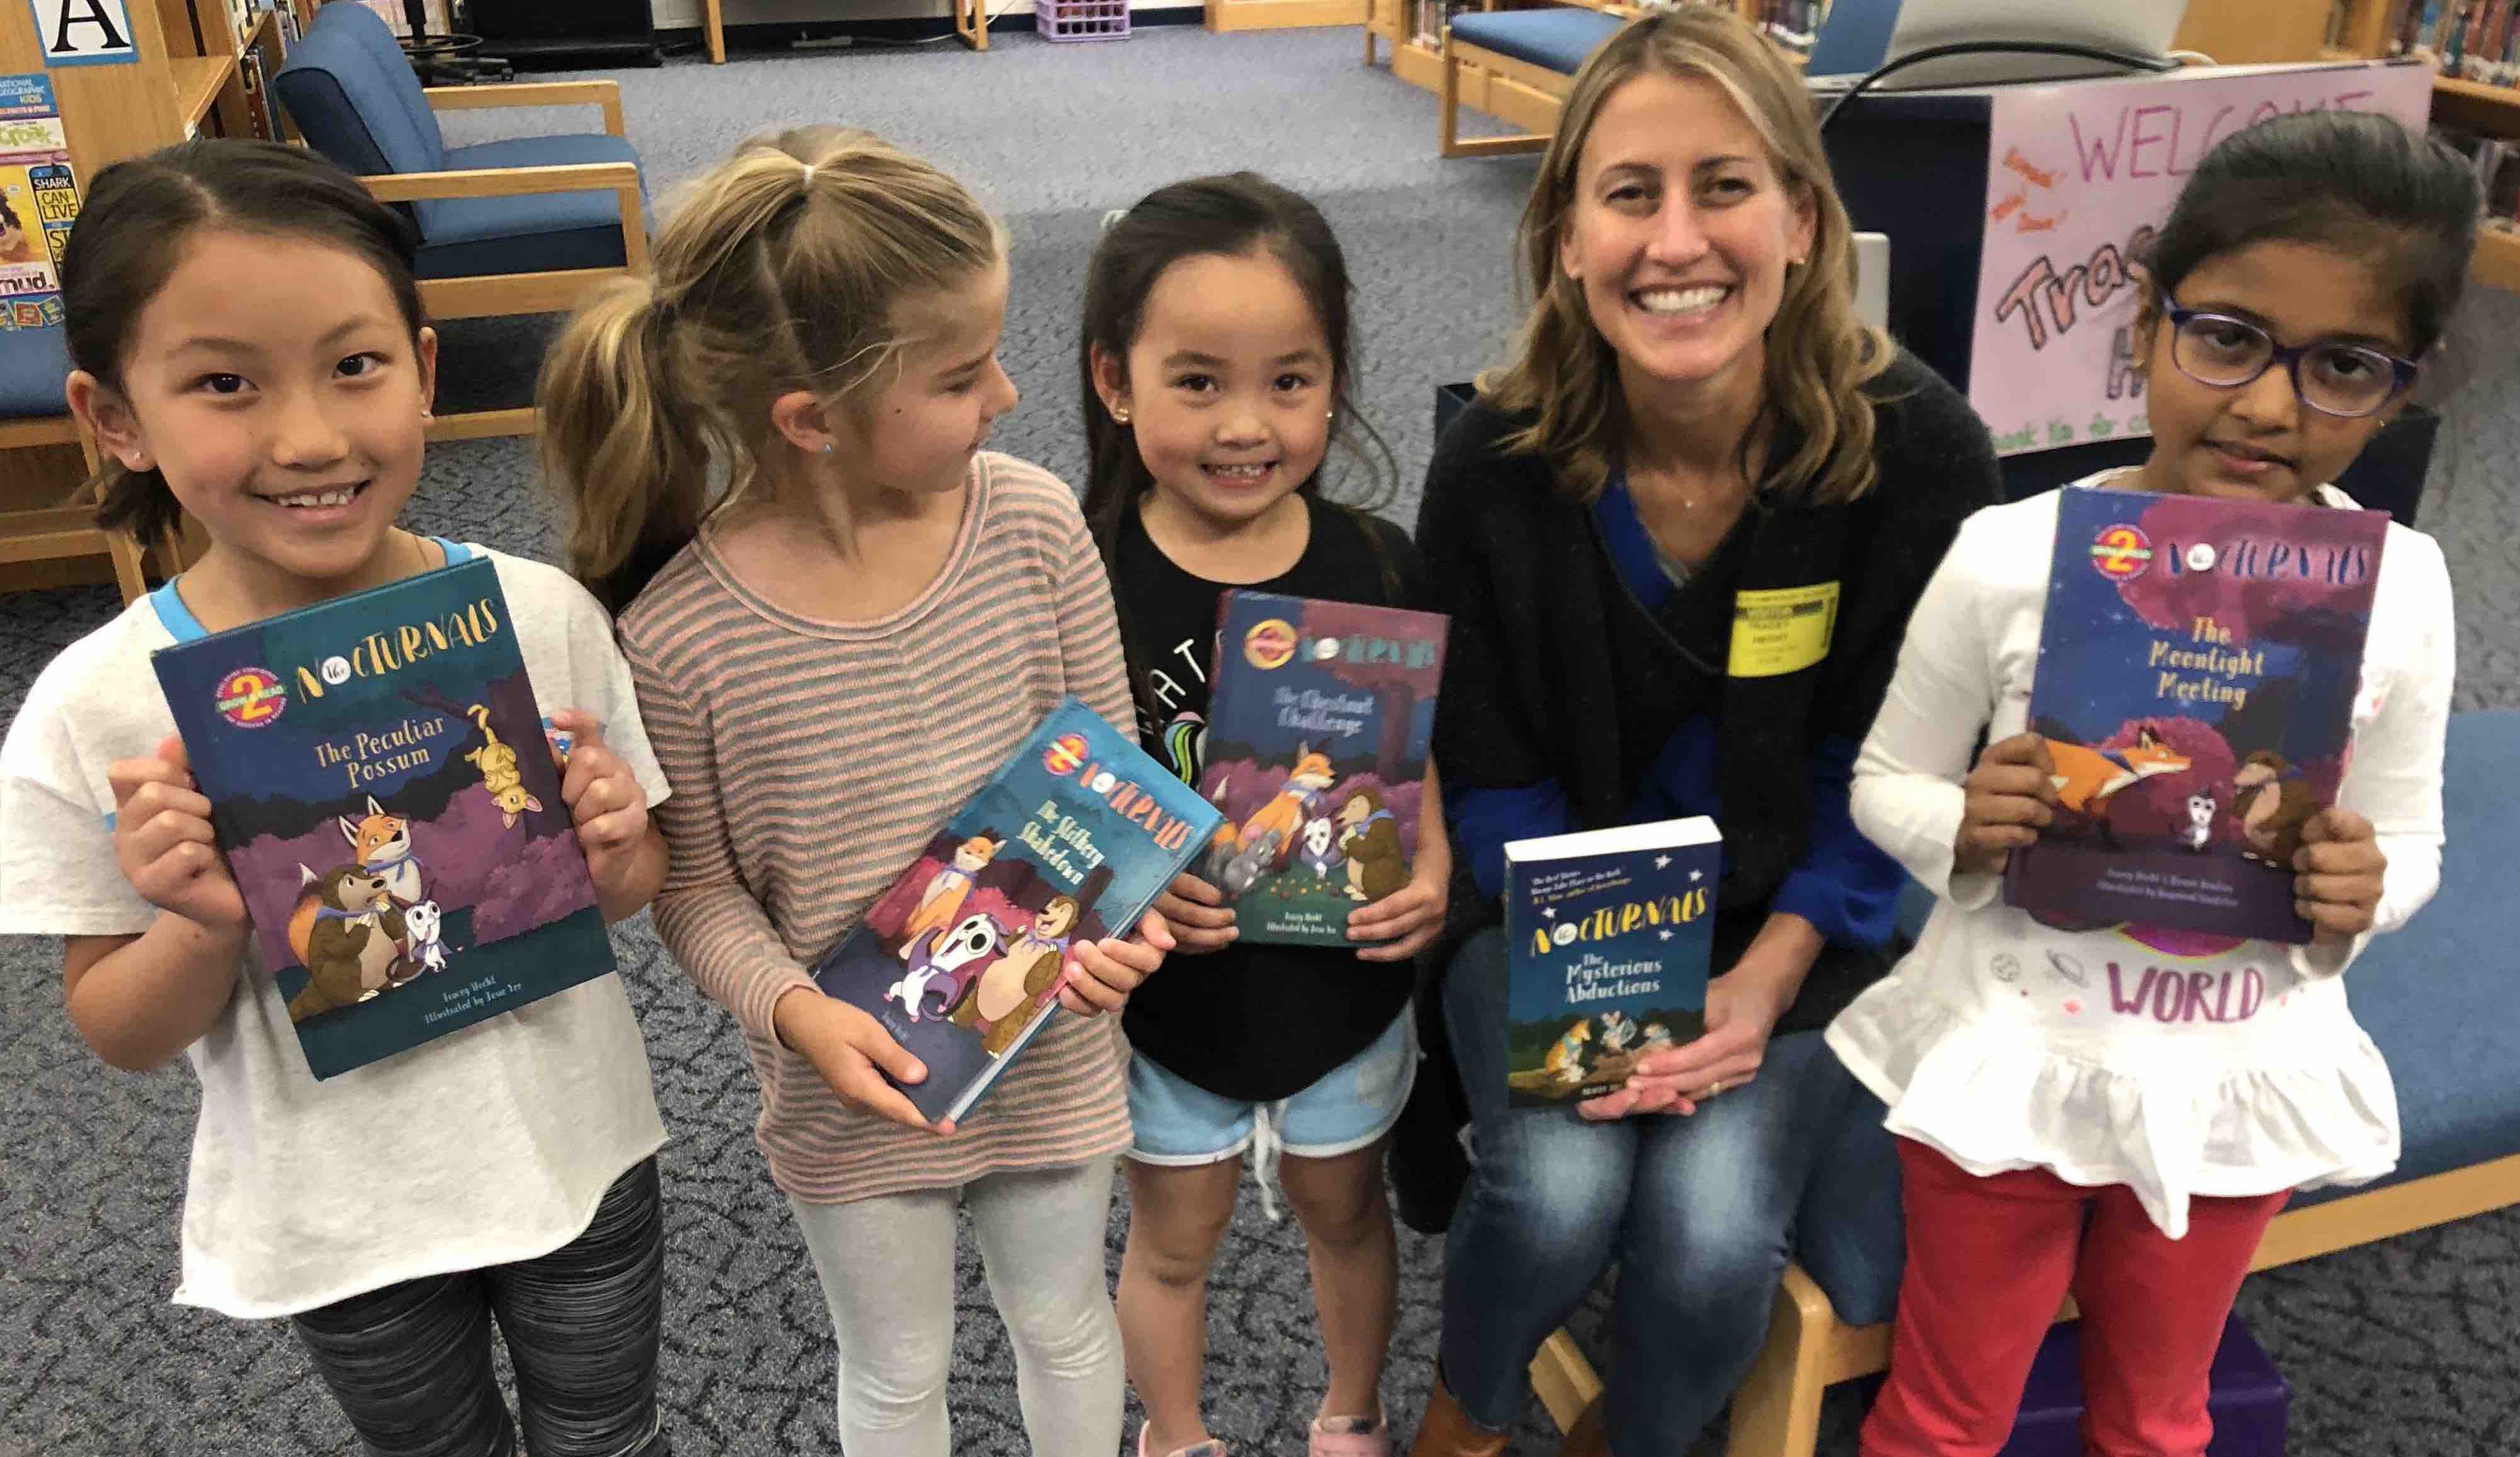 Tracey Hecht, the author of the Nocturnals series, is holding up The Nocturnals Mysterious Abductions while posing with four girls who are all holding up different Early Reader books. 